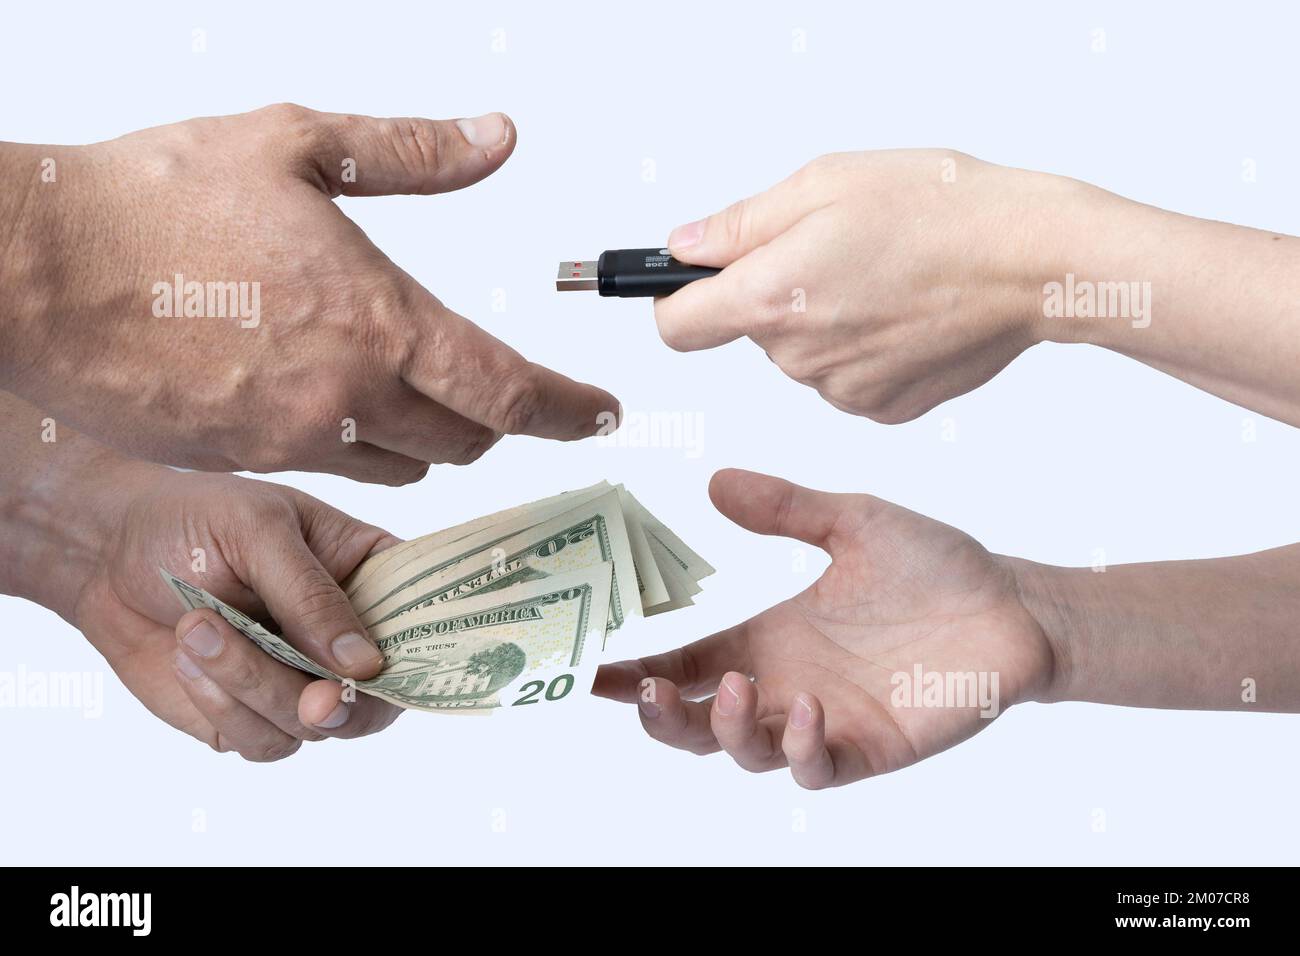 Exchange a storage device for cash between two individuals where only their hands and forearms are visible on a white background. Stock Photo